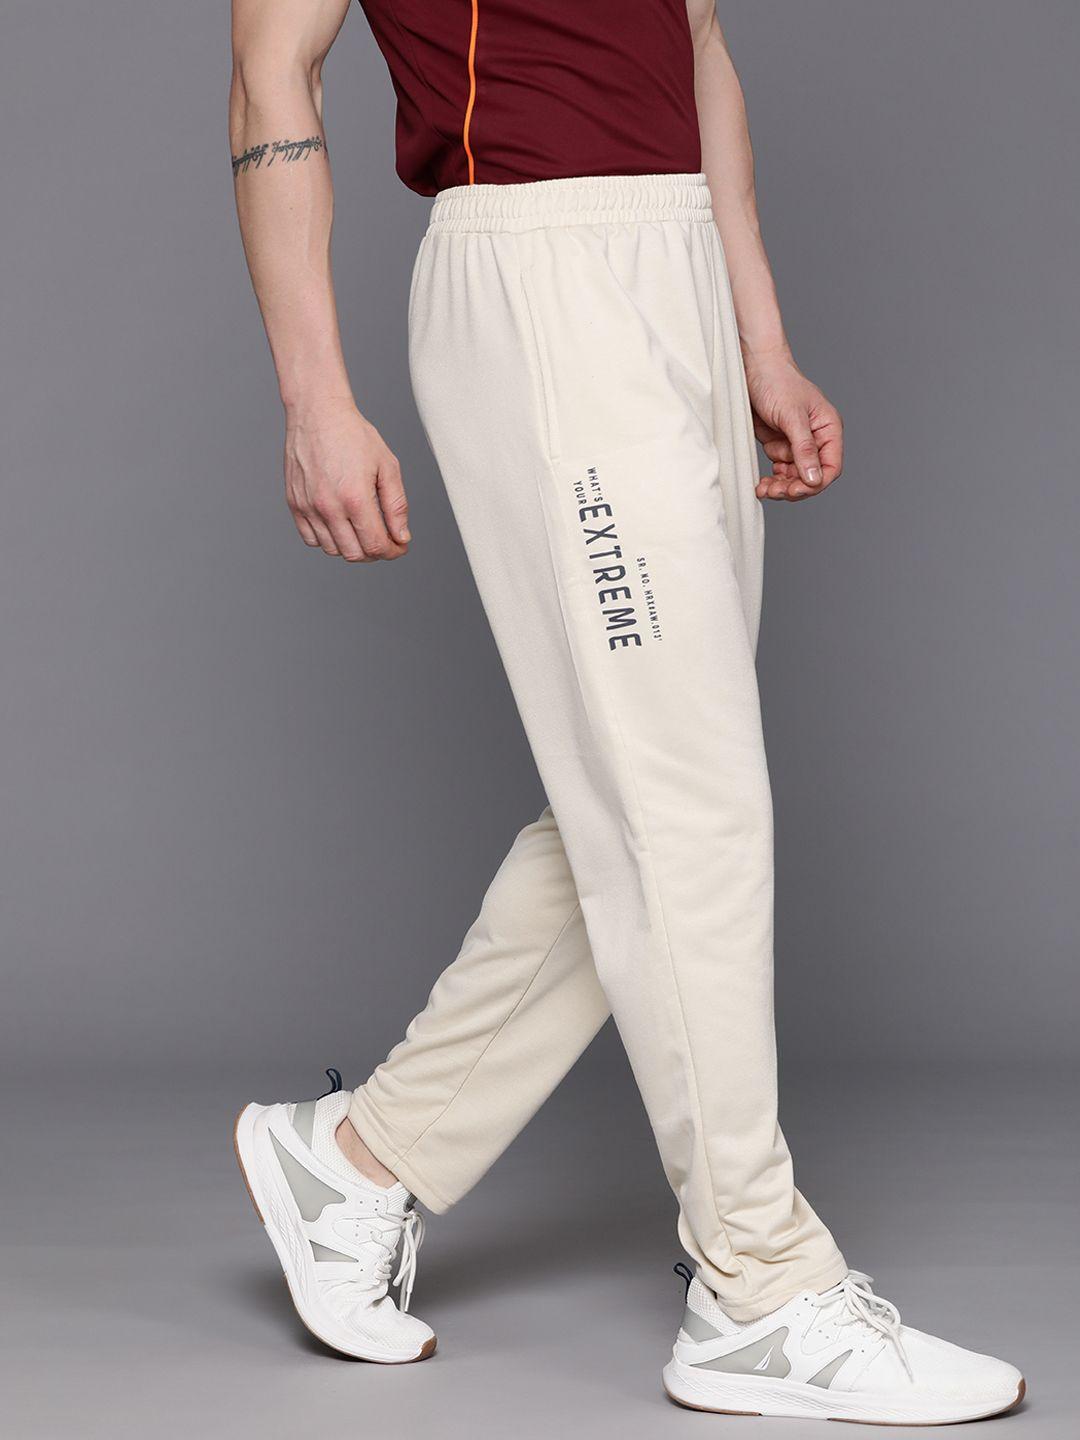 hrx by hrithik roshan men lifestyle track pants with placement typography